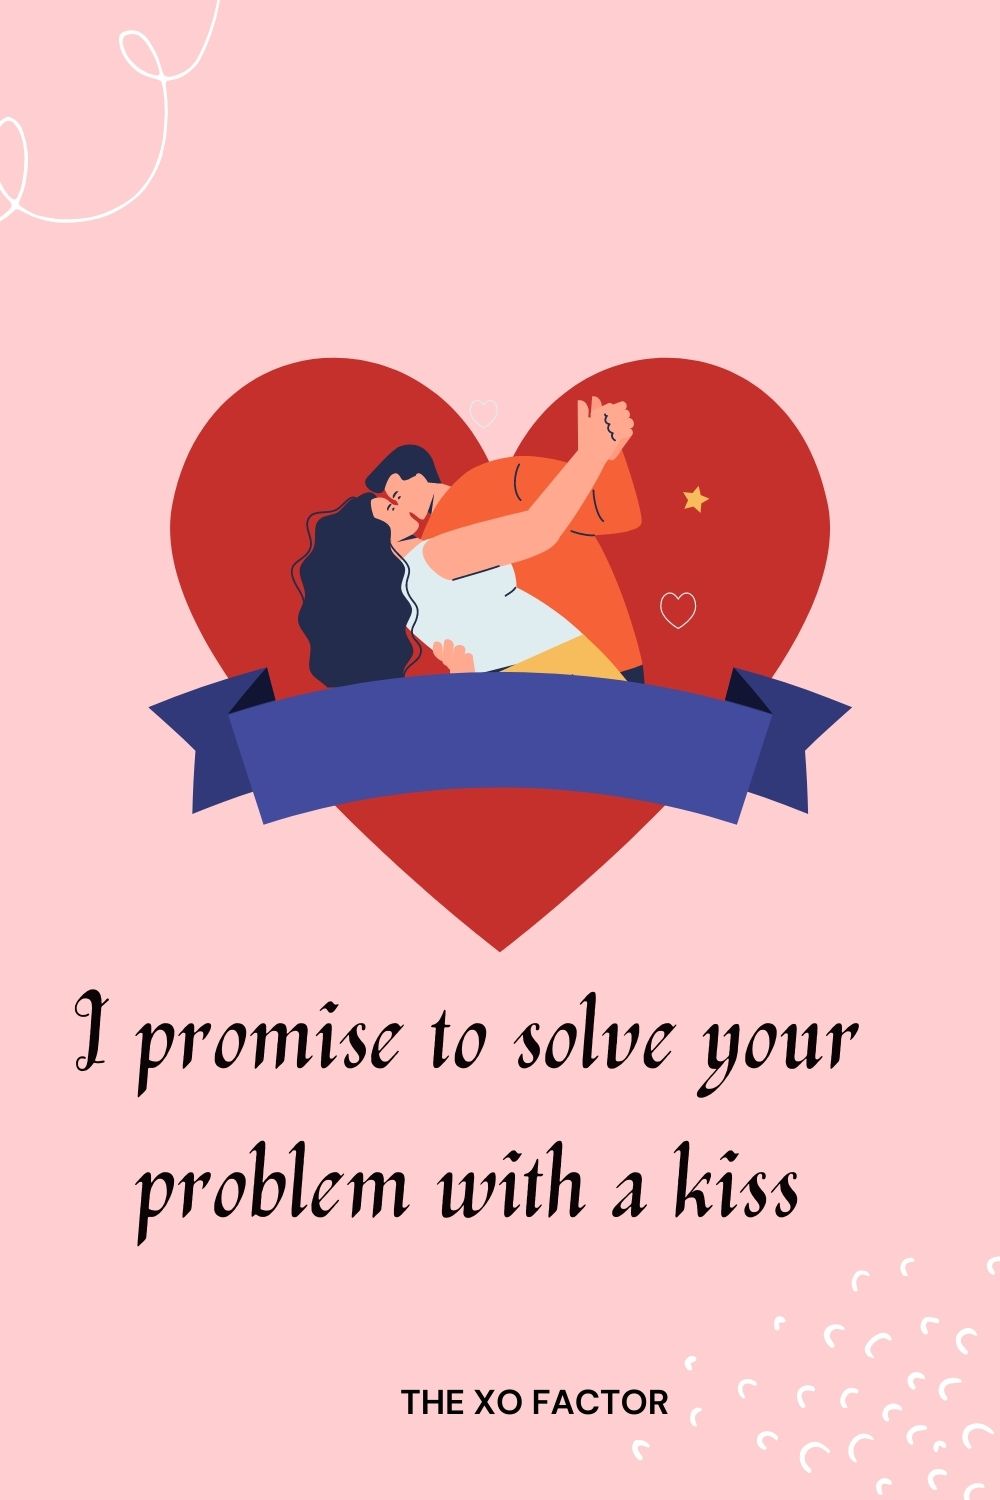 I promise to solve your problem with a kiss